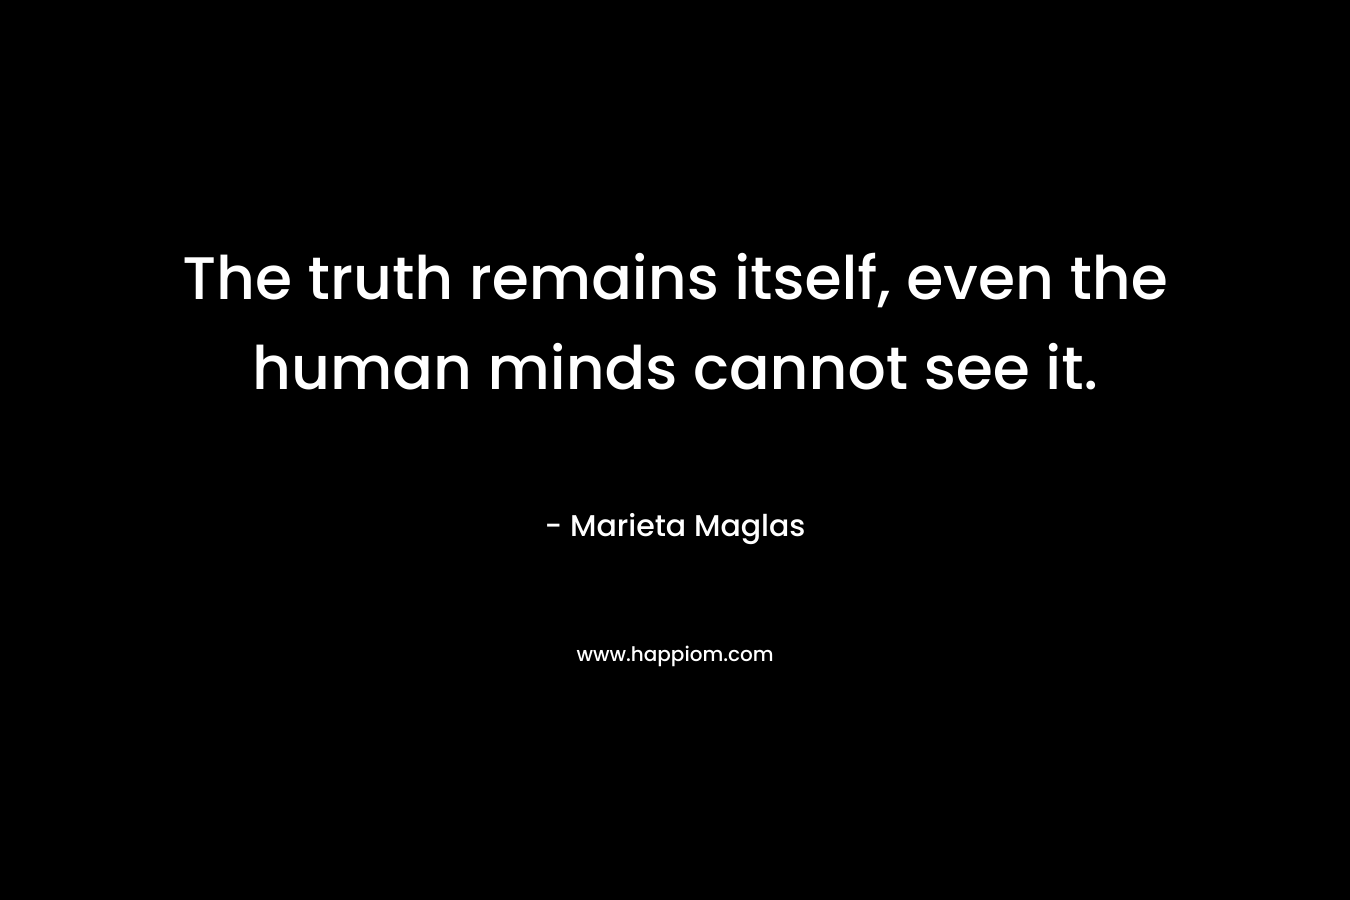 The truth remains itself, even the human minds cannot see it. – Marieta Maglas